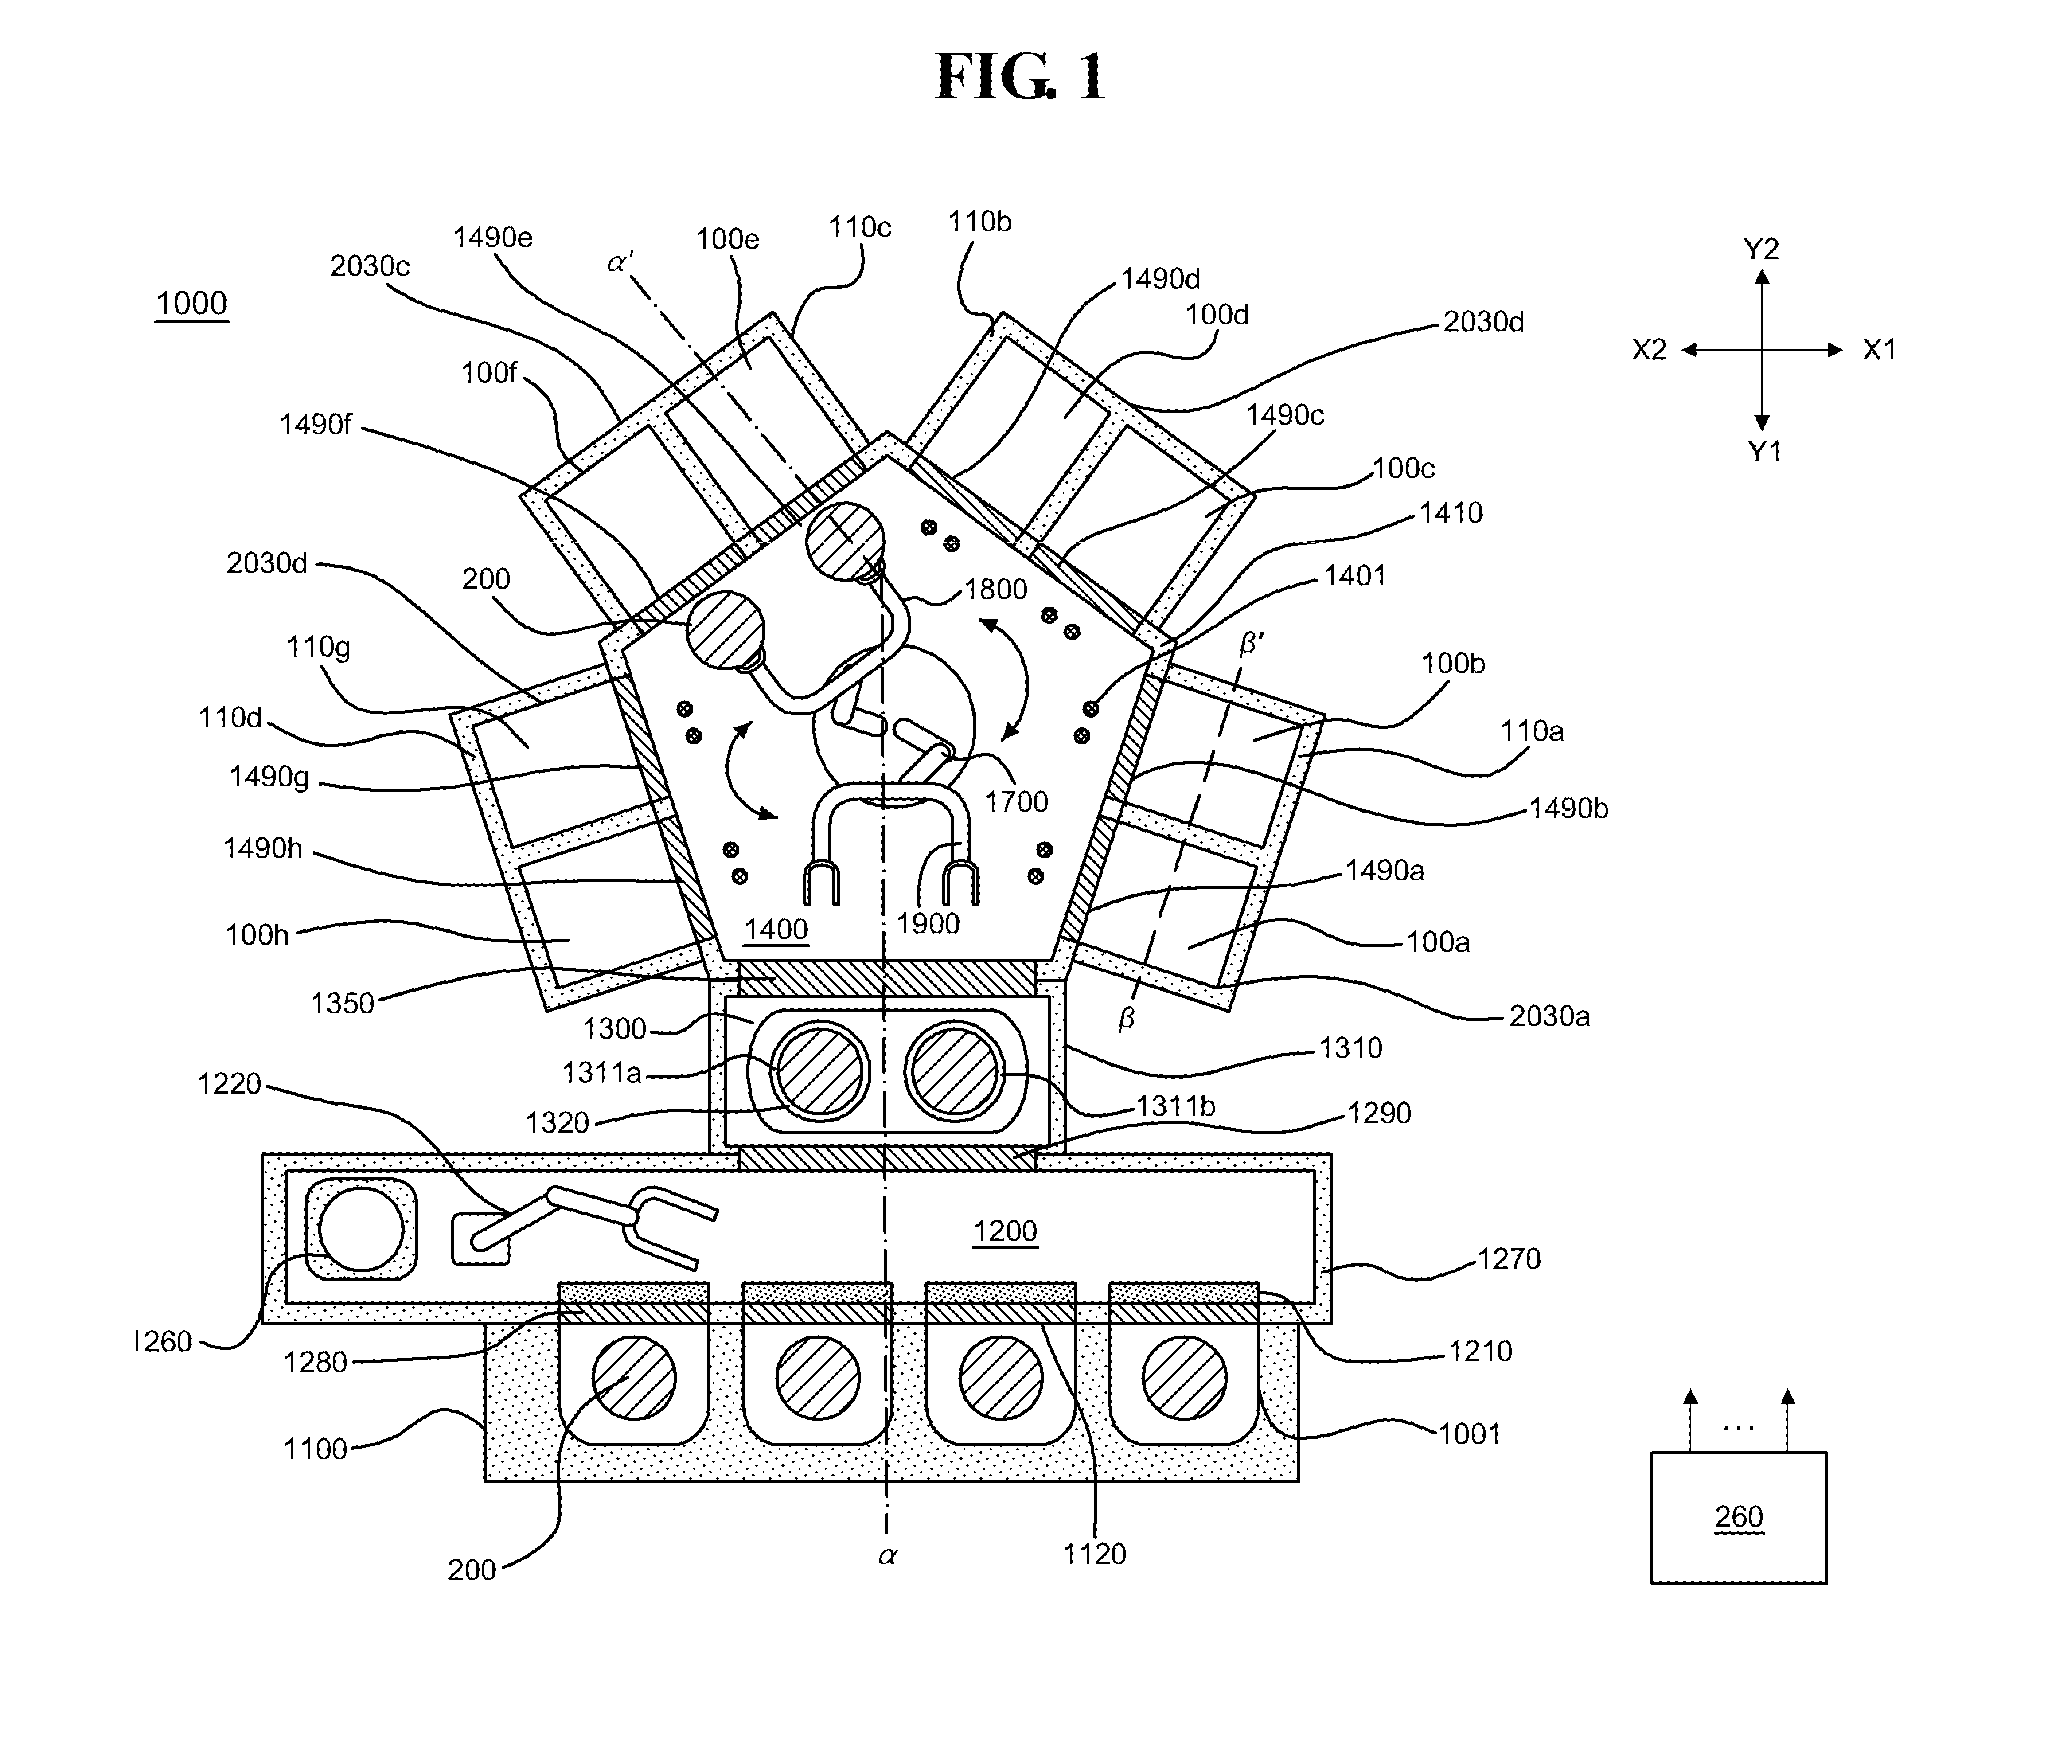 Substrate processing apparatus, method of manufacturing semiconductor device and non-transitory computer-readable recording medium